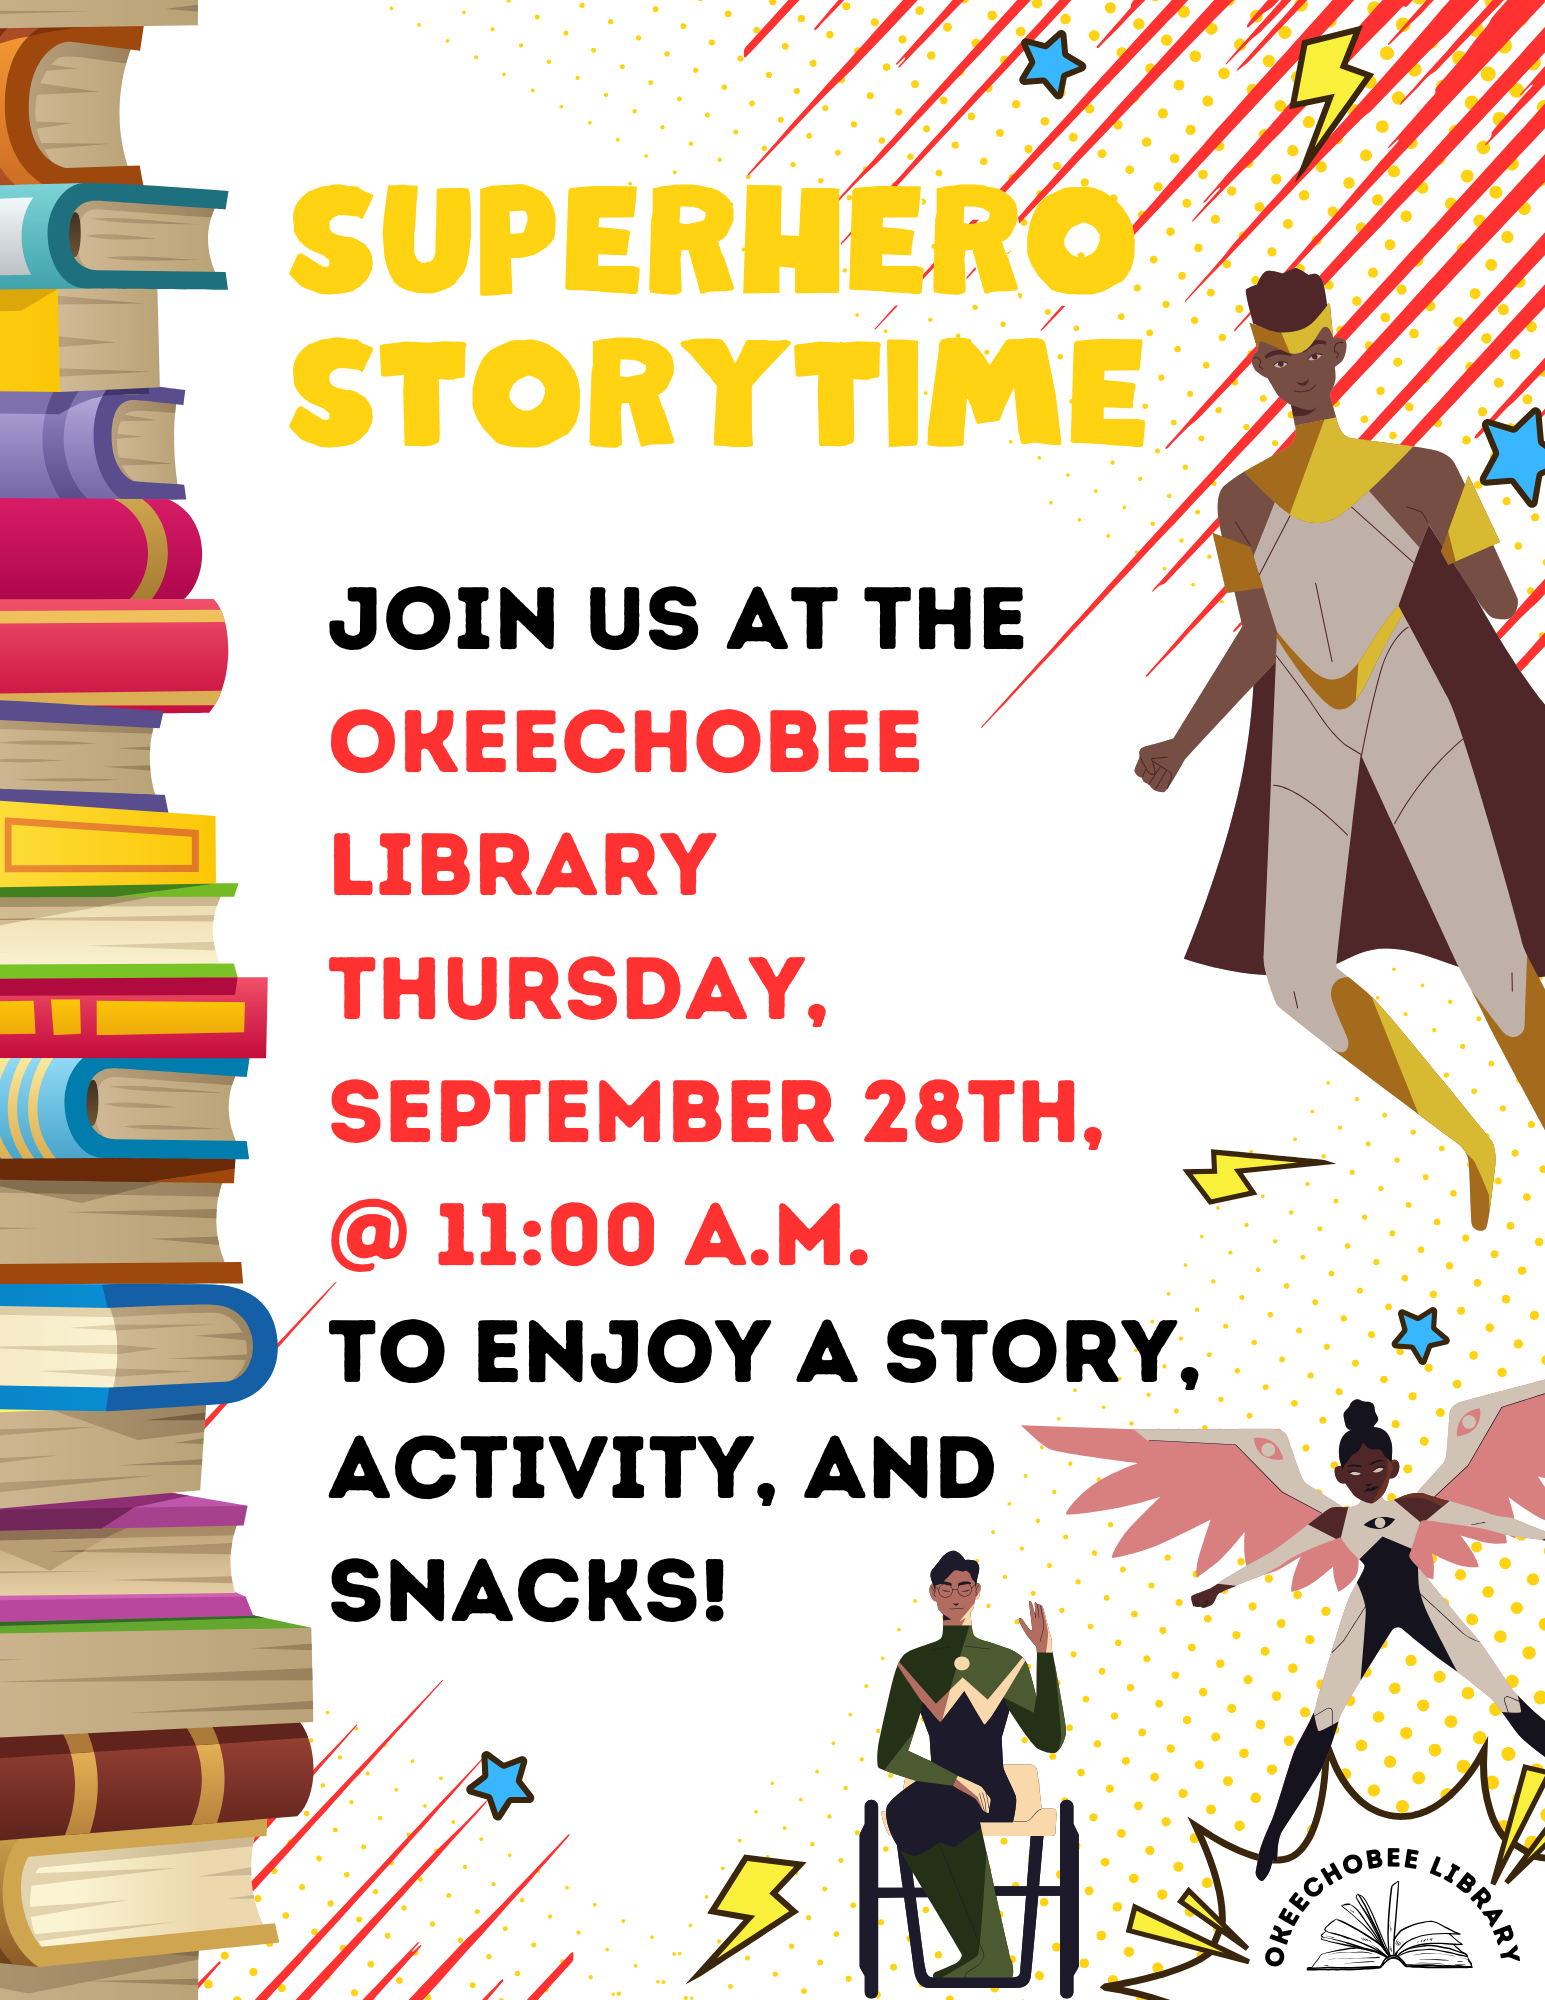 Join us at the Okeechobee Library on September 28th at 11:00 A.M. for our Superhero Story Time! Come enjoy a story, a simple activity, and fun snacks!